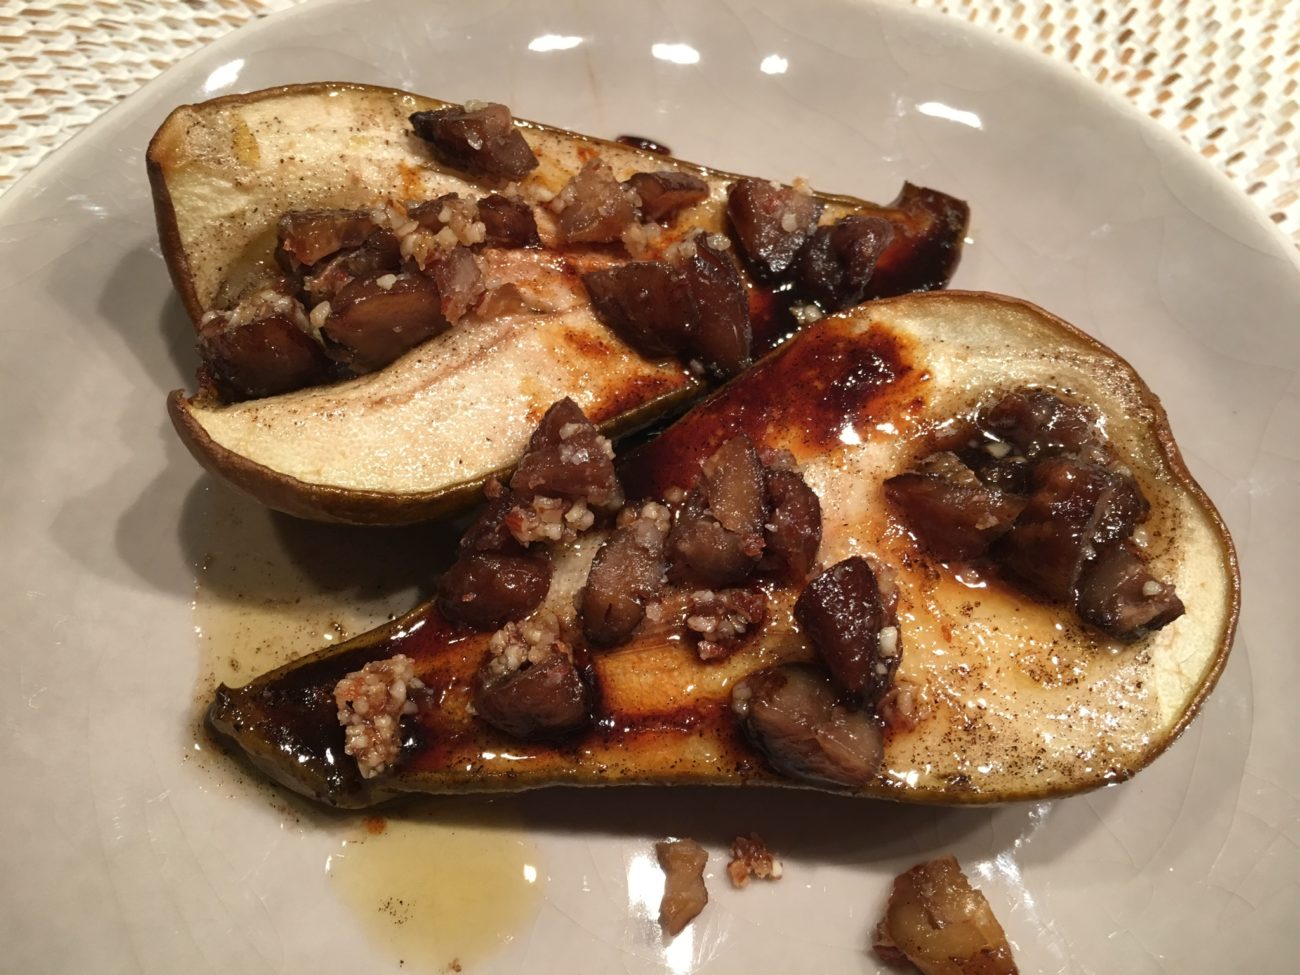 Baked pears with crunchy chestnuts